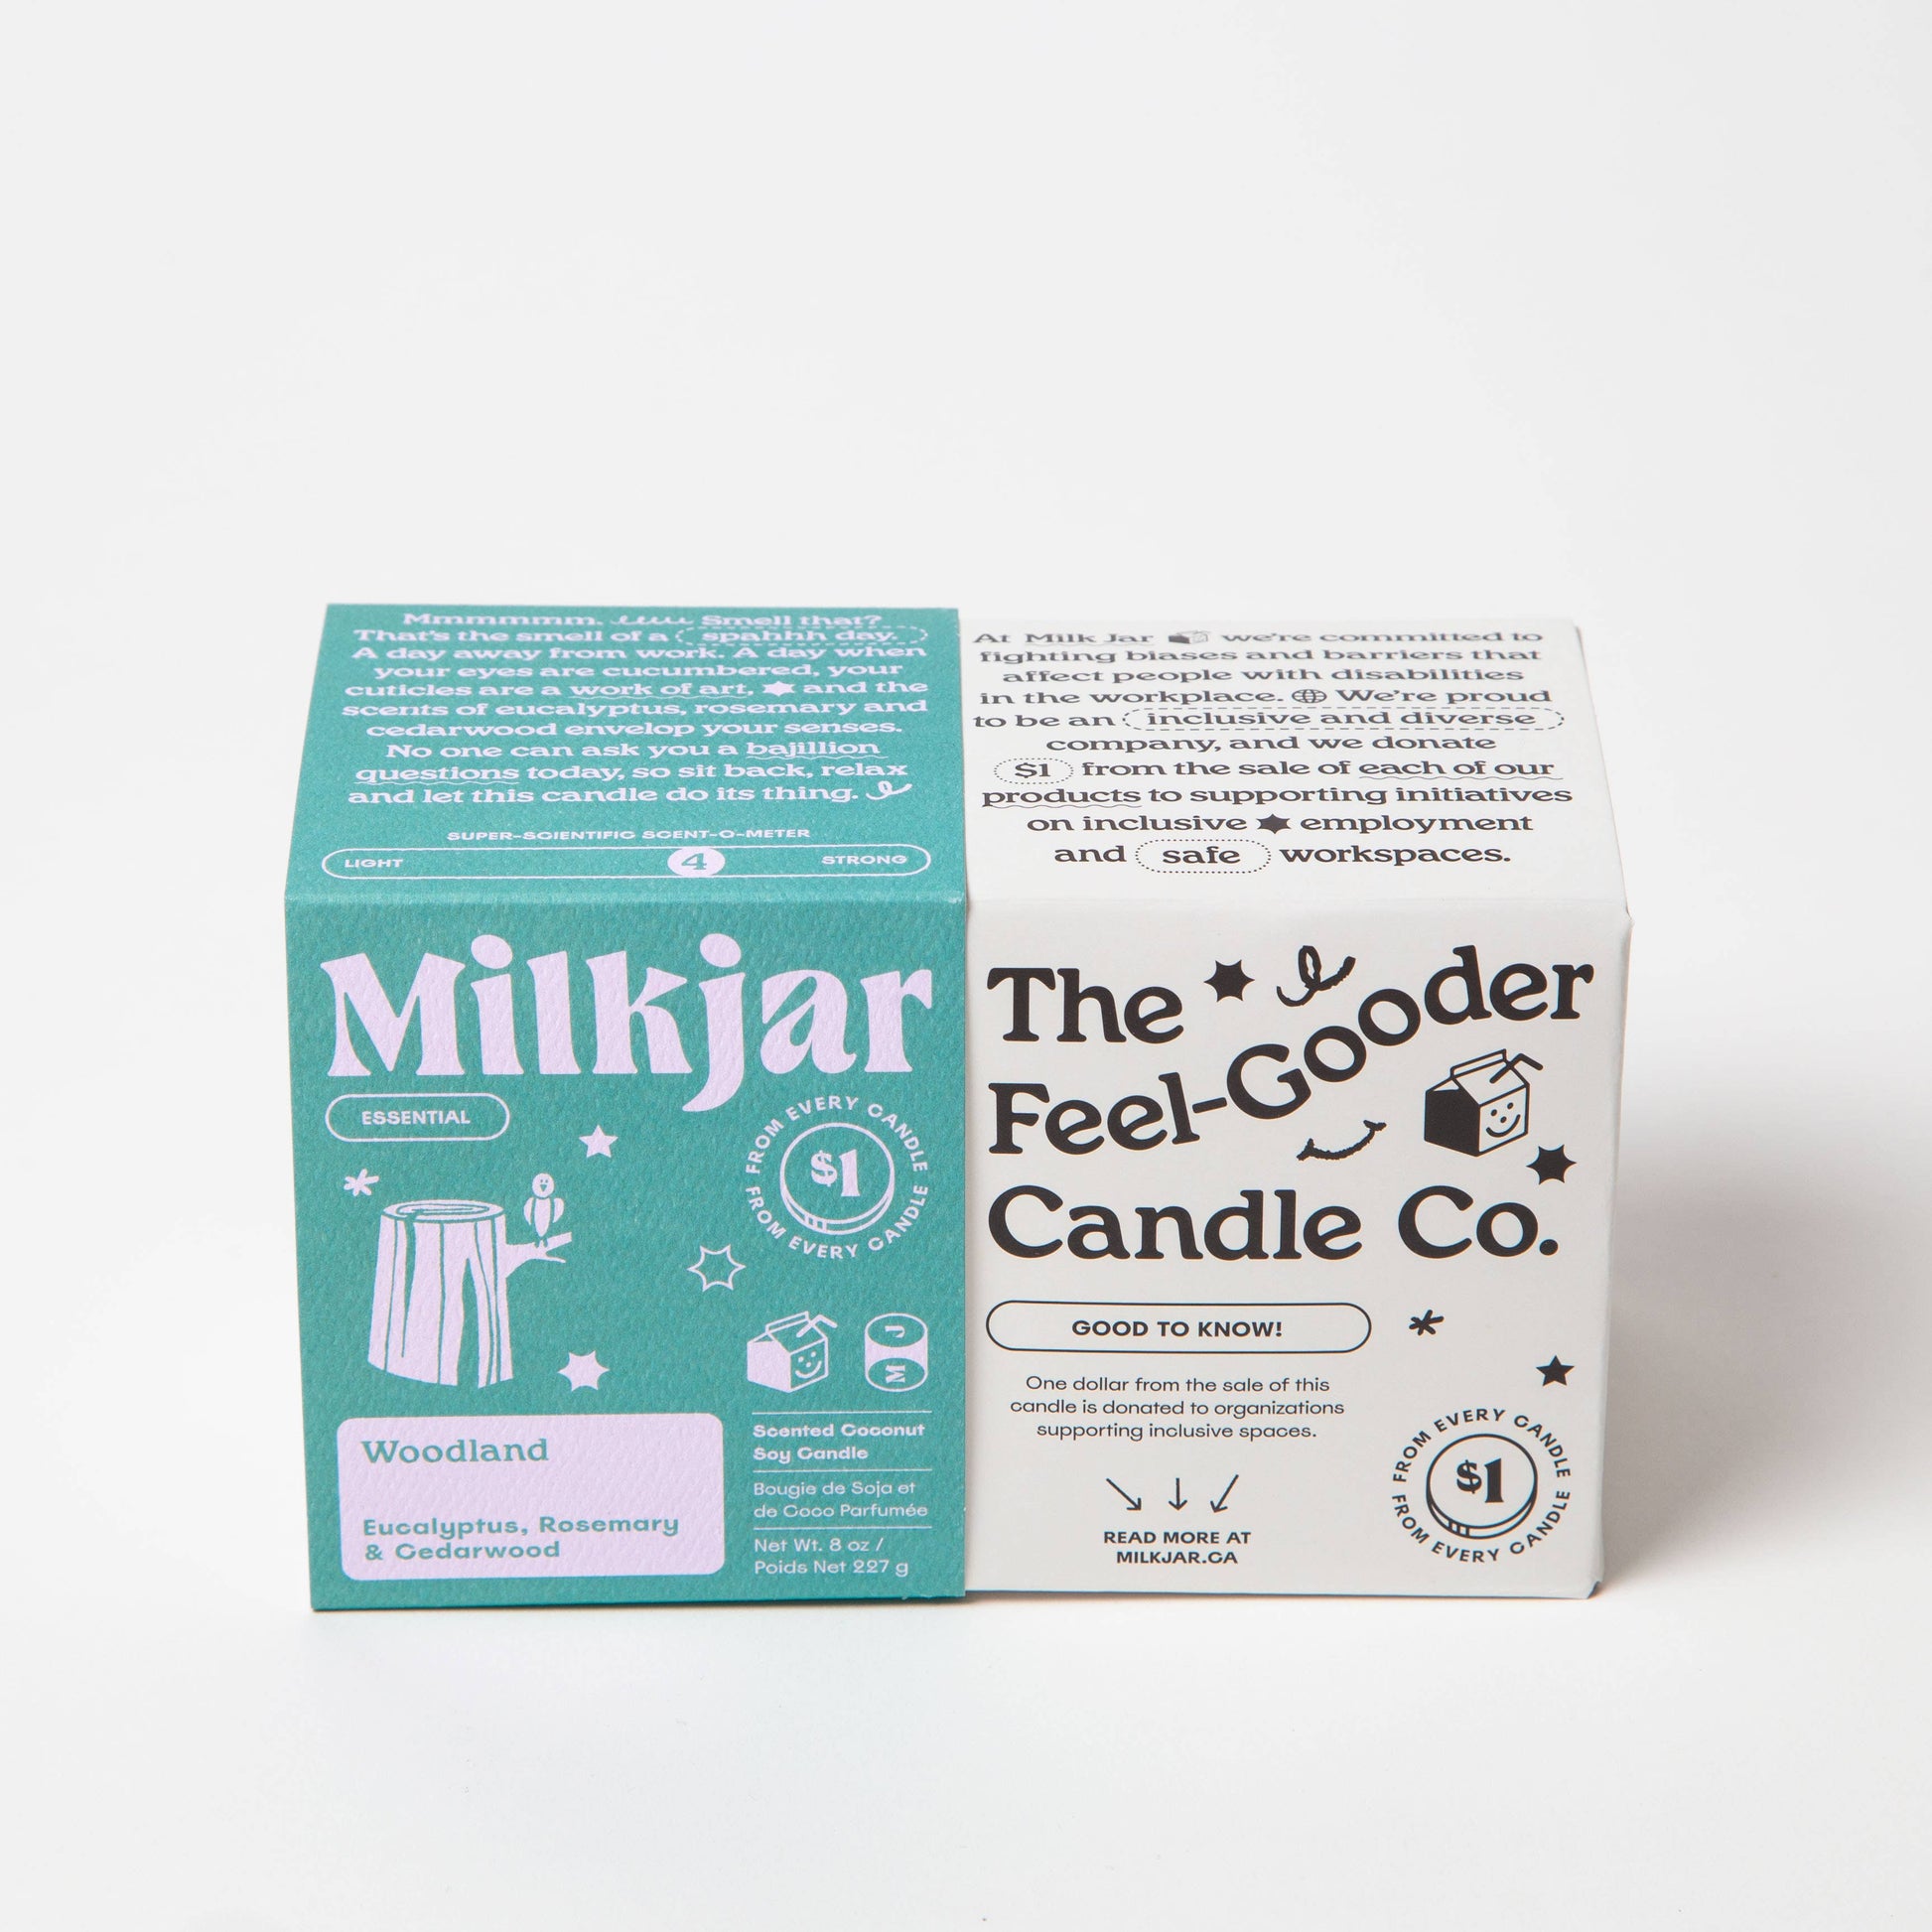 Milk Jar Candle Co. Woodland Scented Candle - Osmology Scented Candles & Home Fragrance